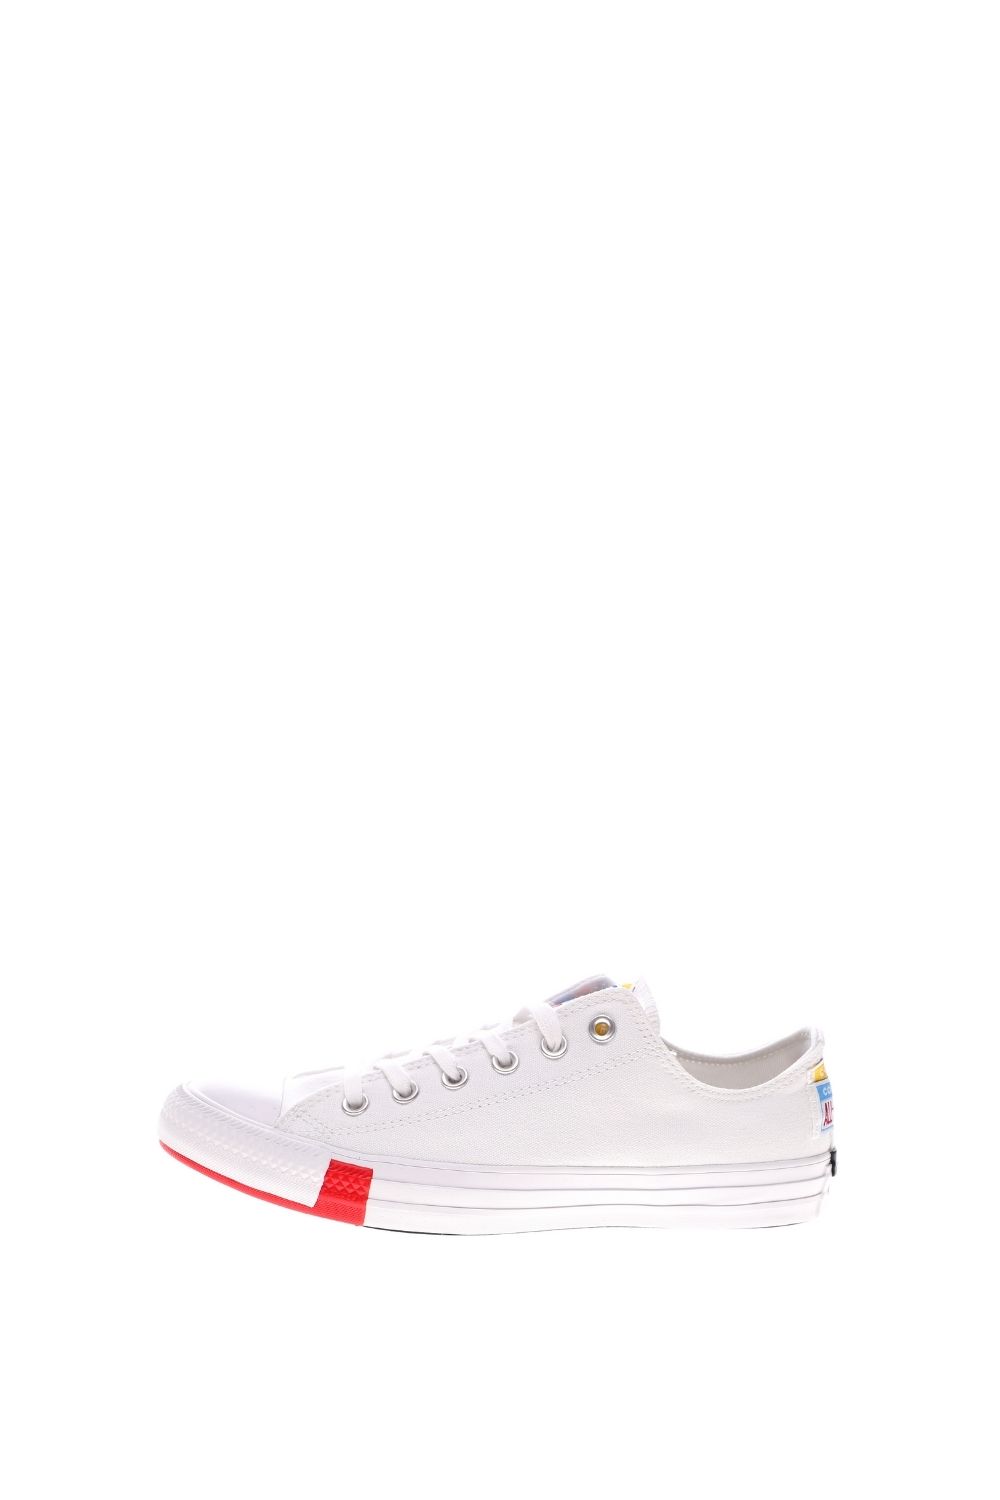 CONVERSE - Unisex sneakers CONVERSE CHUCK TAYLOR ALL STAR LOGO λευκά Γυναικεία/Παπούτσια/Sneakers